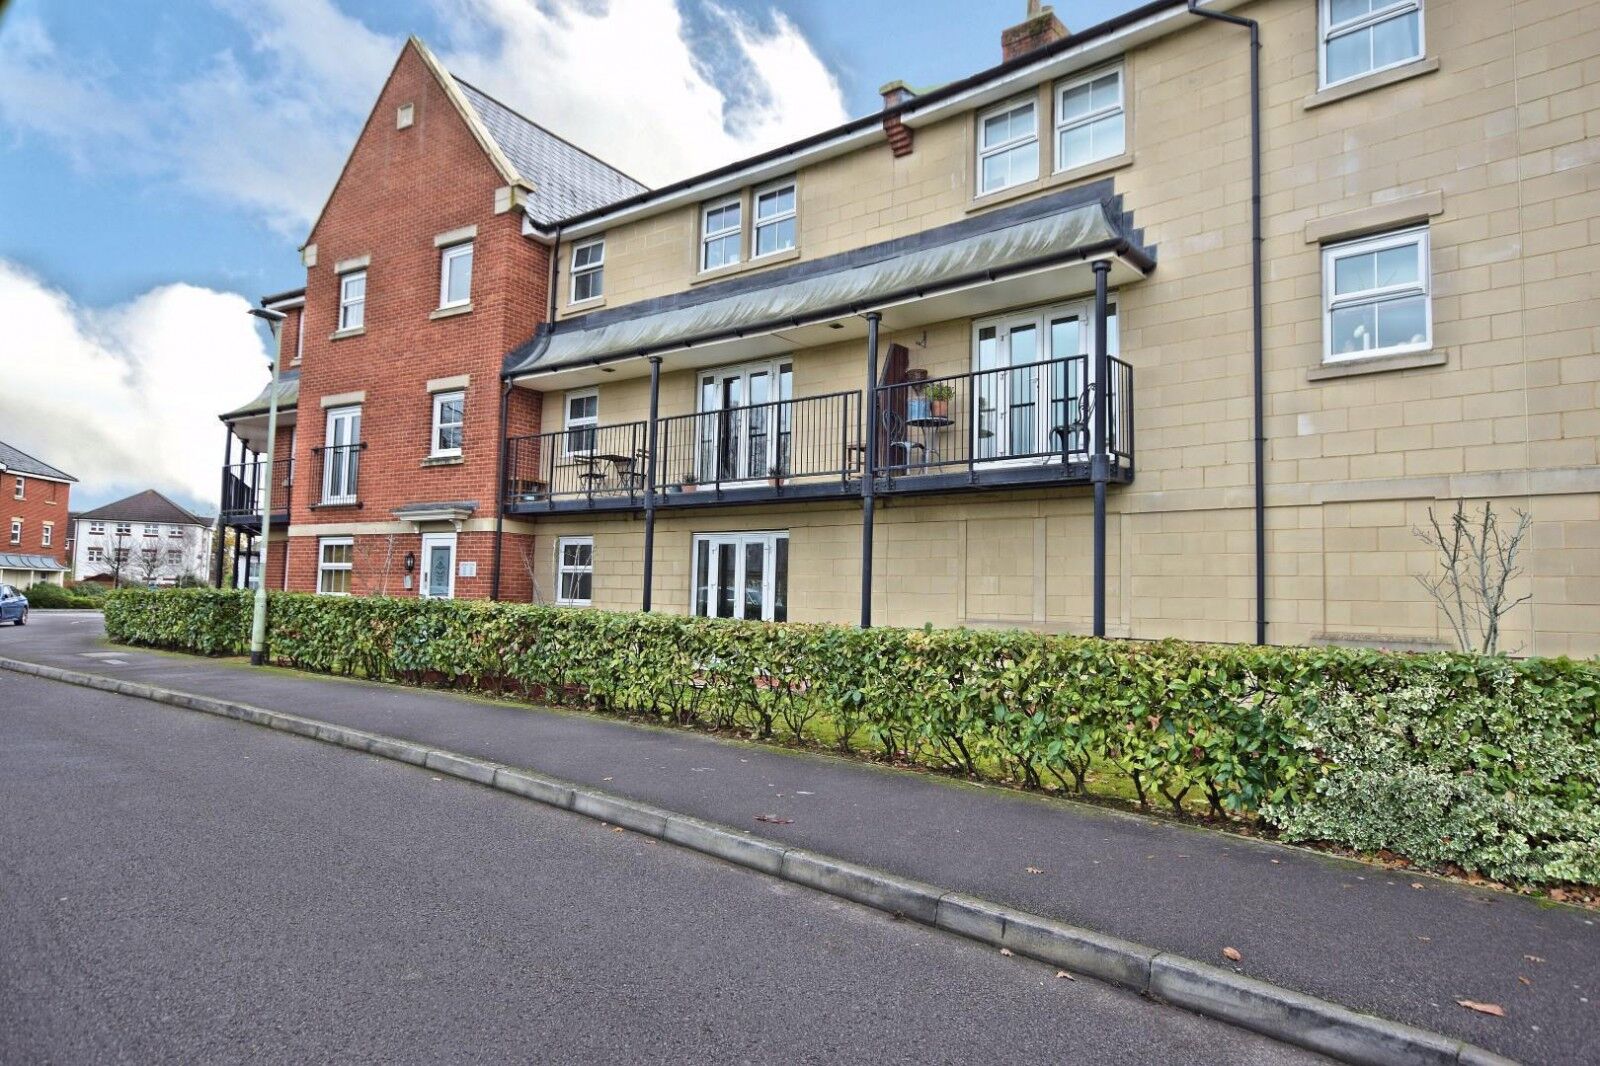 2 bedroom  flat for sale Cirrus Drive, Shinfield, RG2, main image